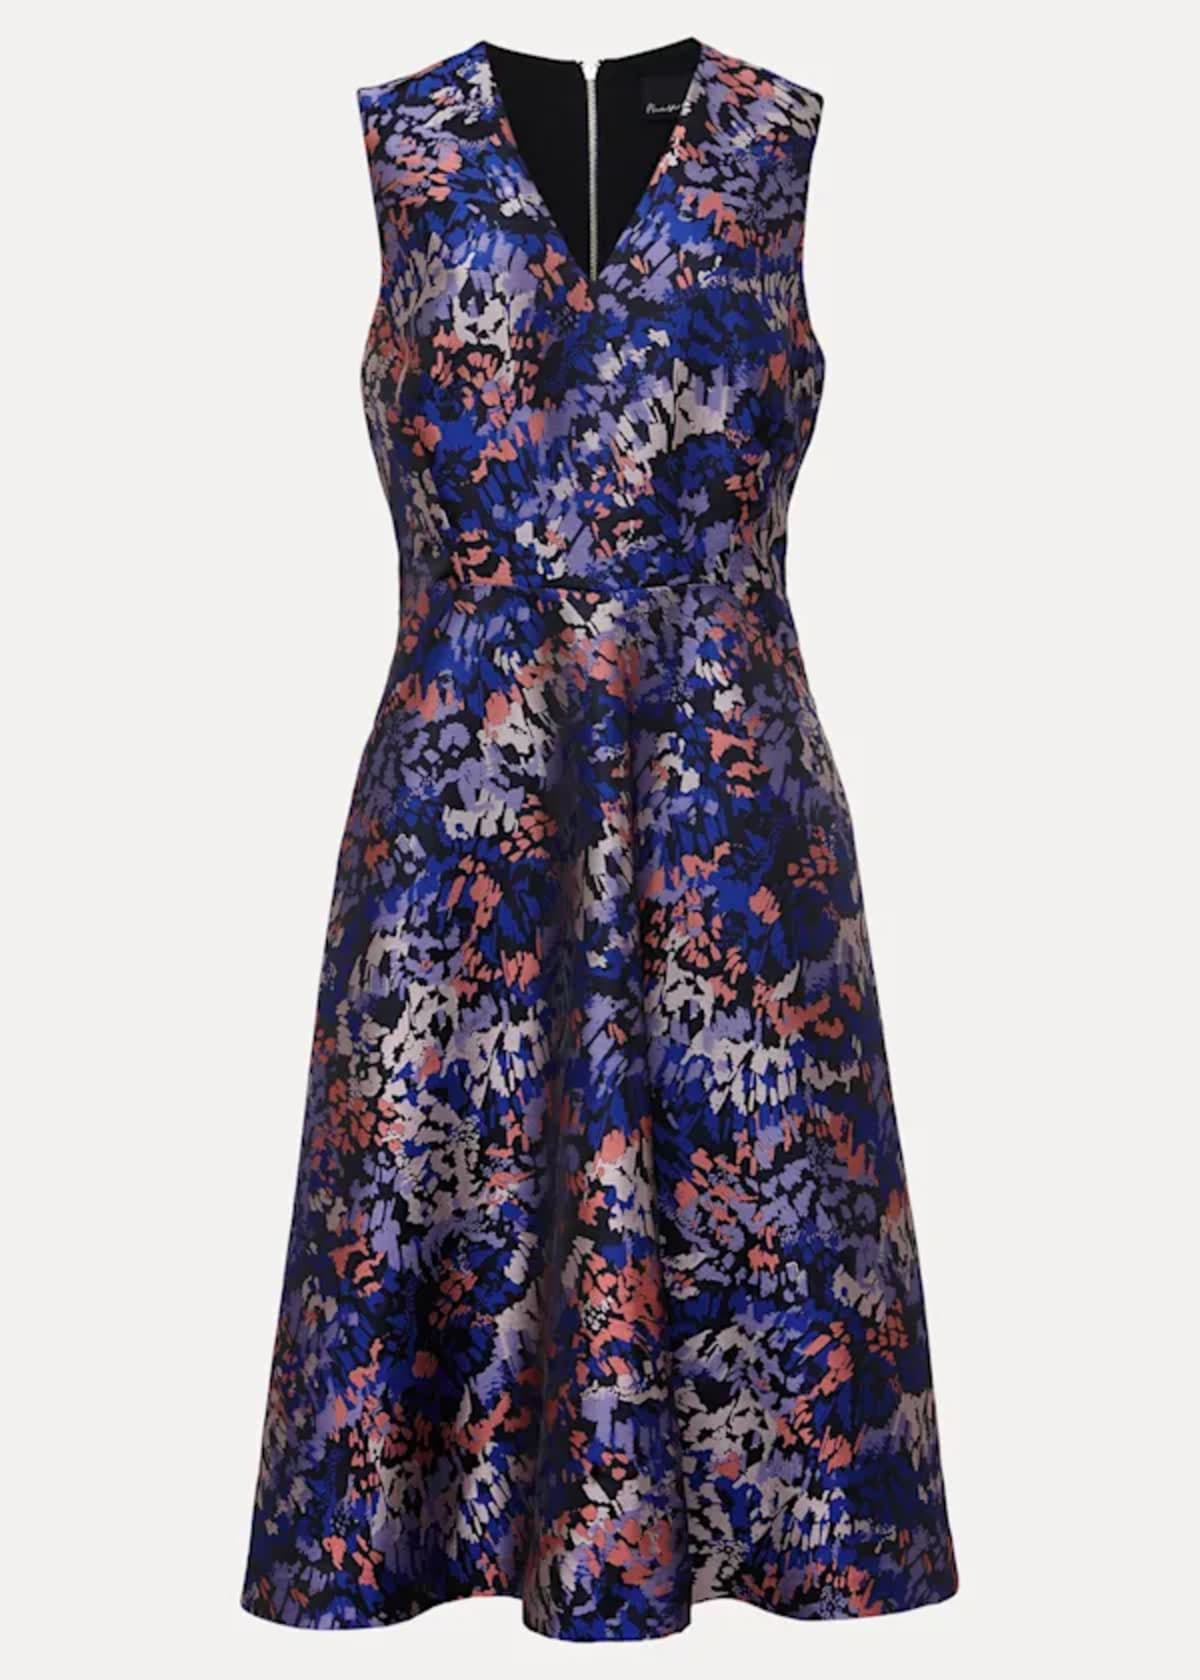 Phase Eight Adonia Abstract Jacquard Dress